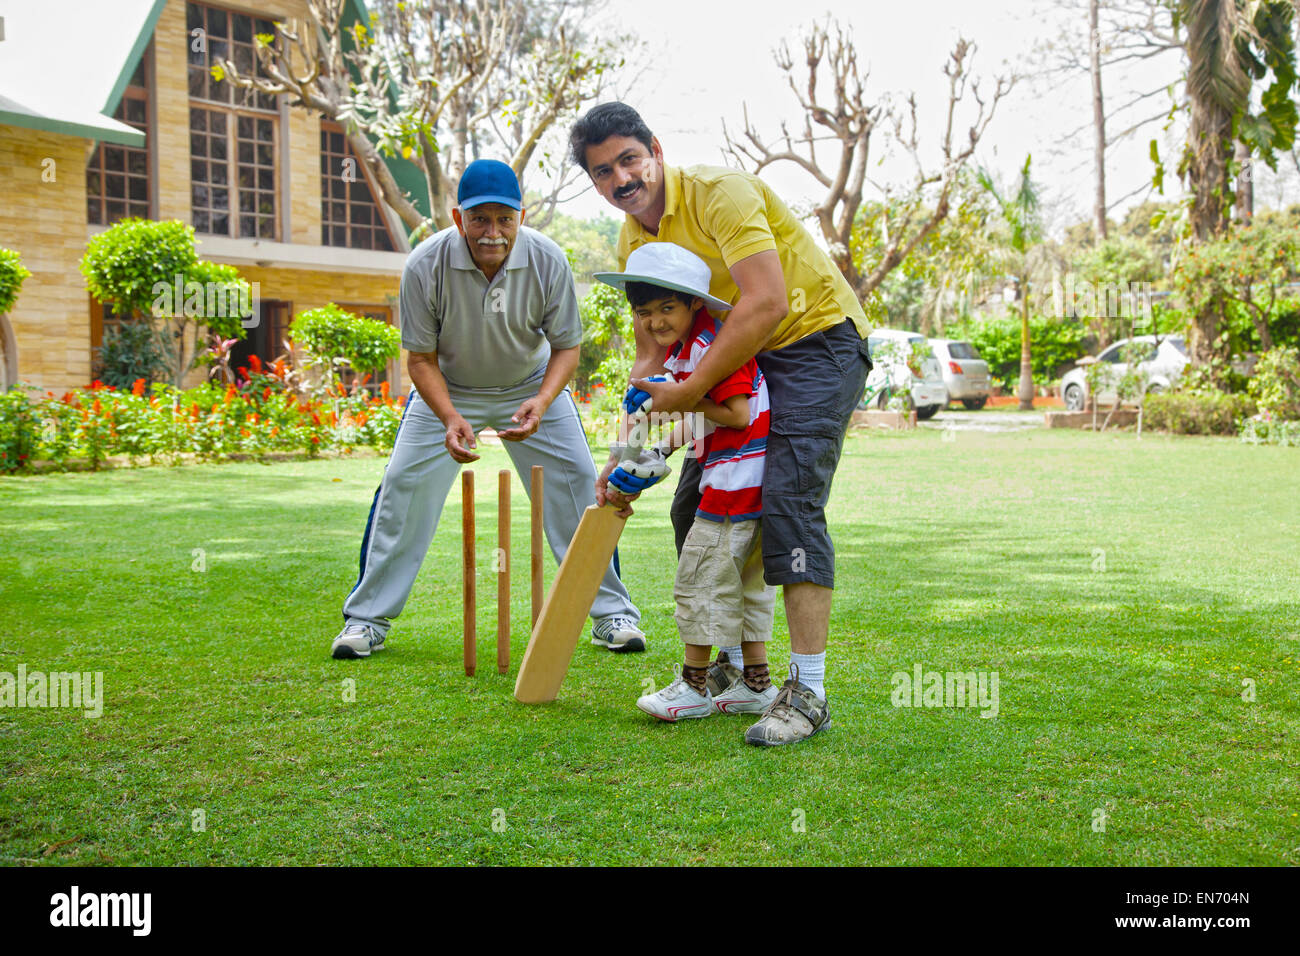 Young boy playing cricket with father and grandfather Stock Photo